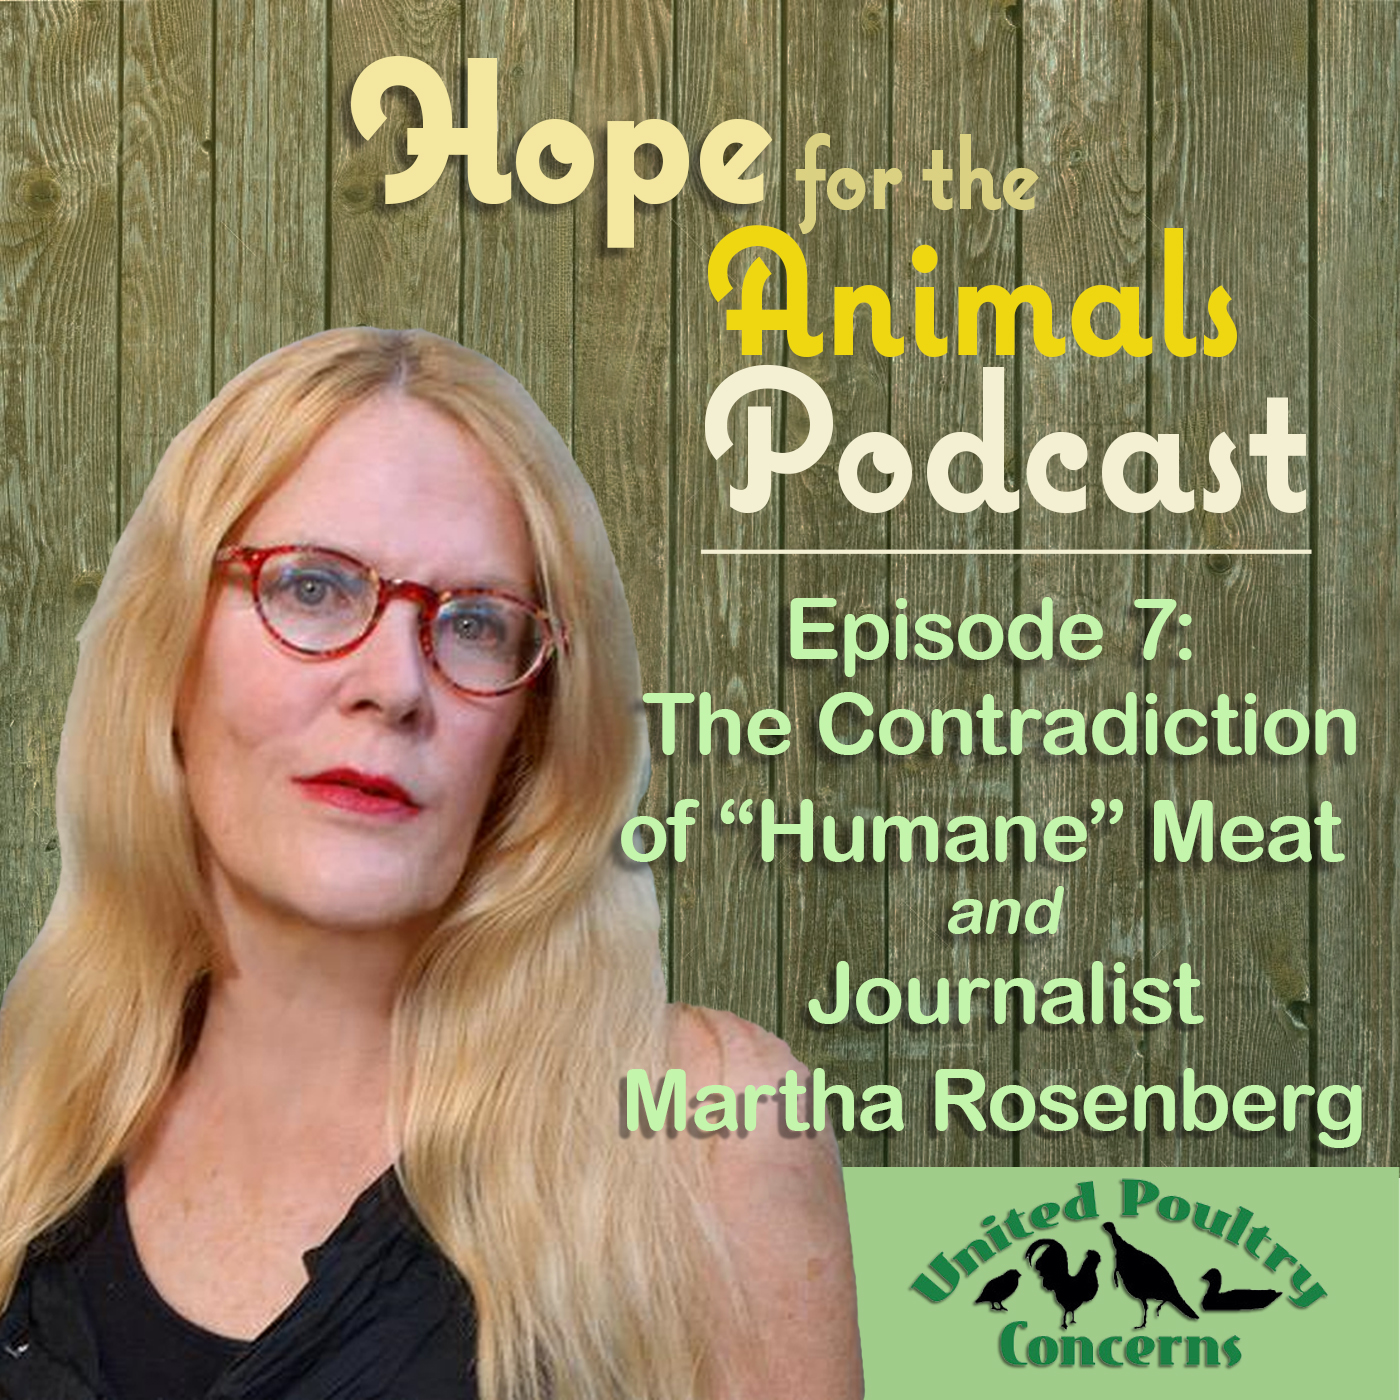 Episode 7: The Contradiction of “Humane” Meat and Journalist Martha Rosenberg